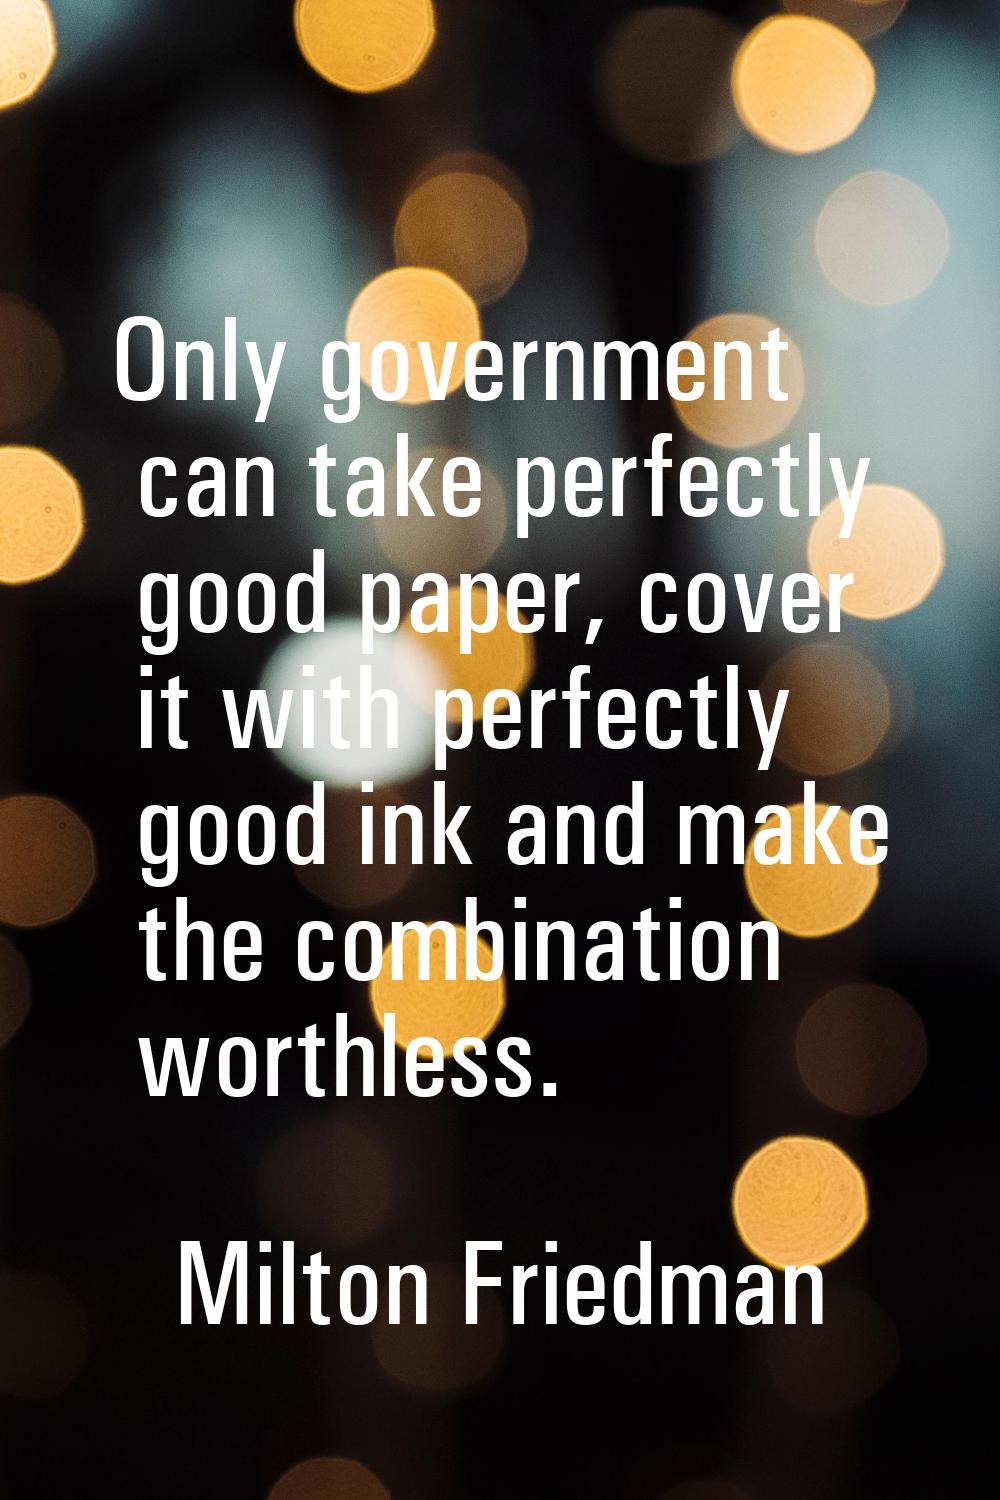 Only government can take perfectly good paper, cover it with perfectly good ink and make the combin